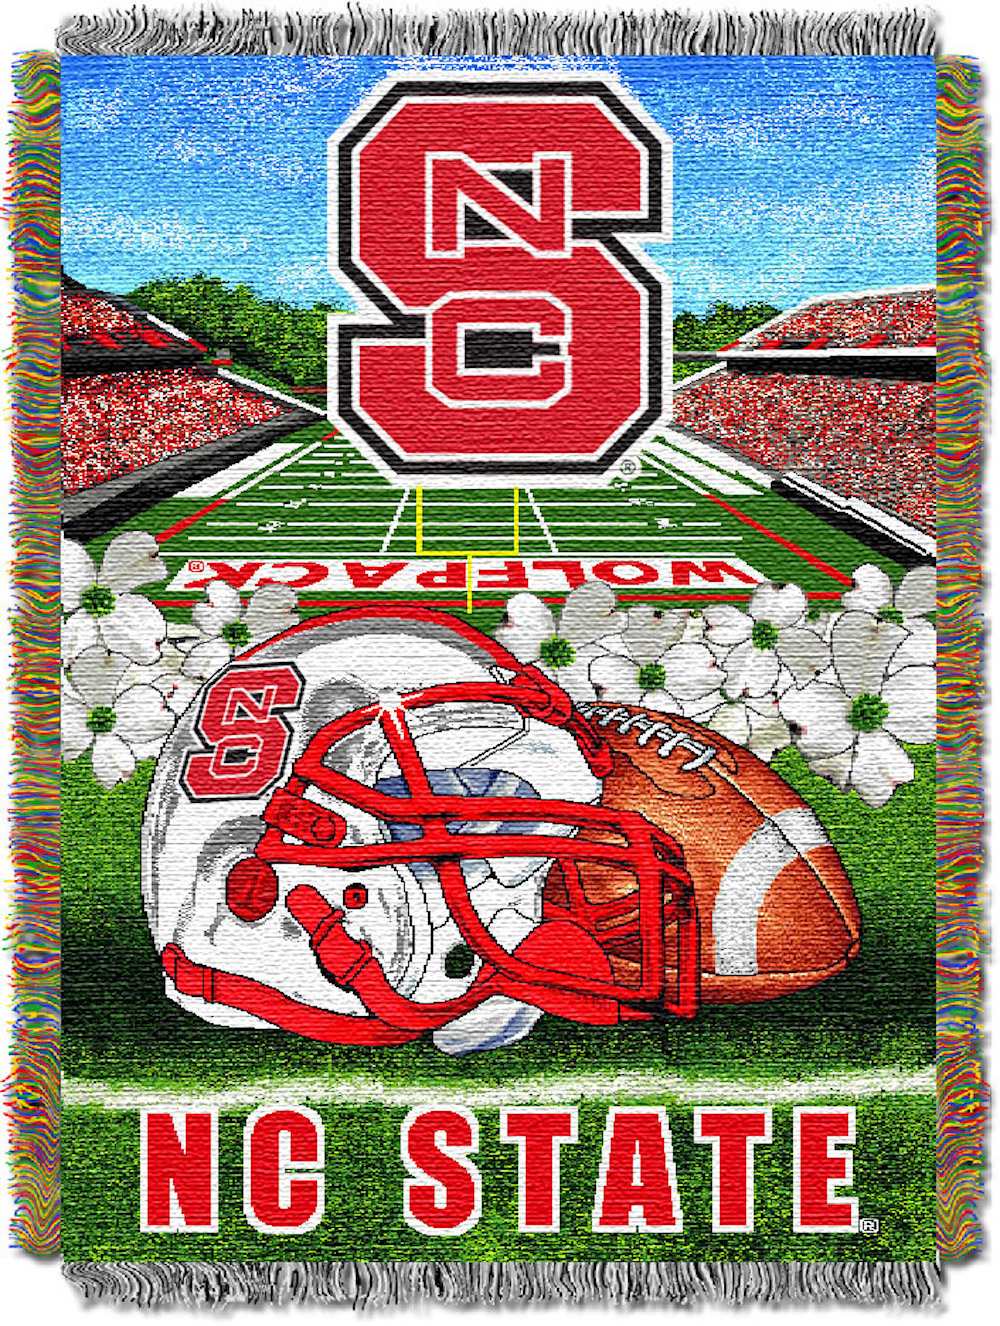 NC State Wolfpack Home Field Advantage Series Tapestry Blanket 48 x 60